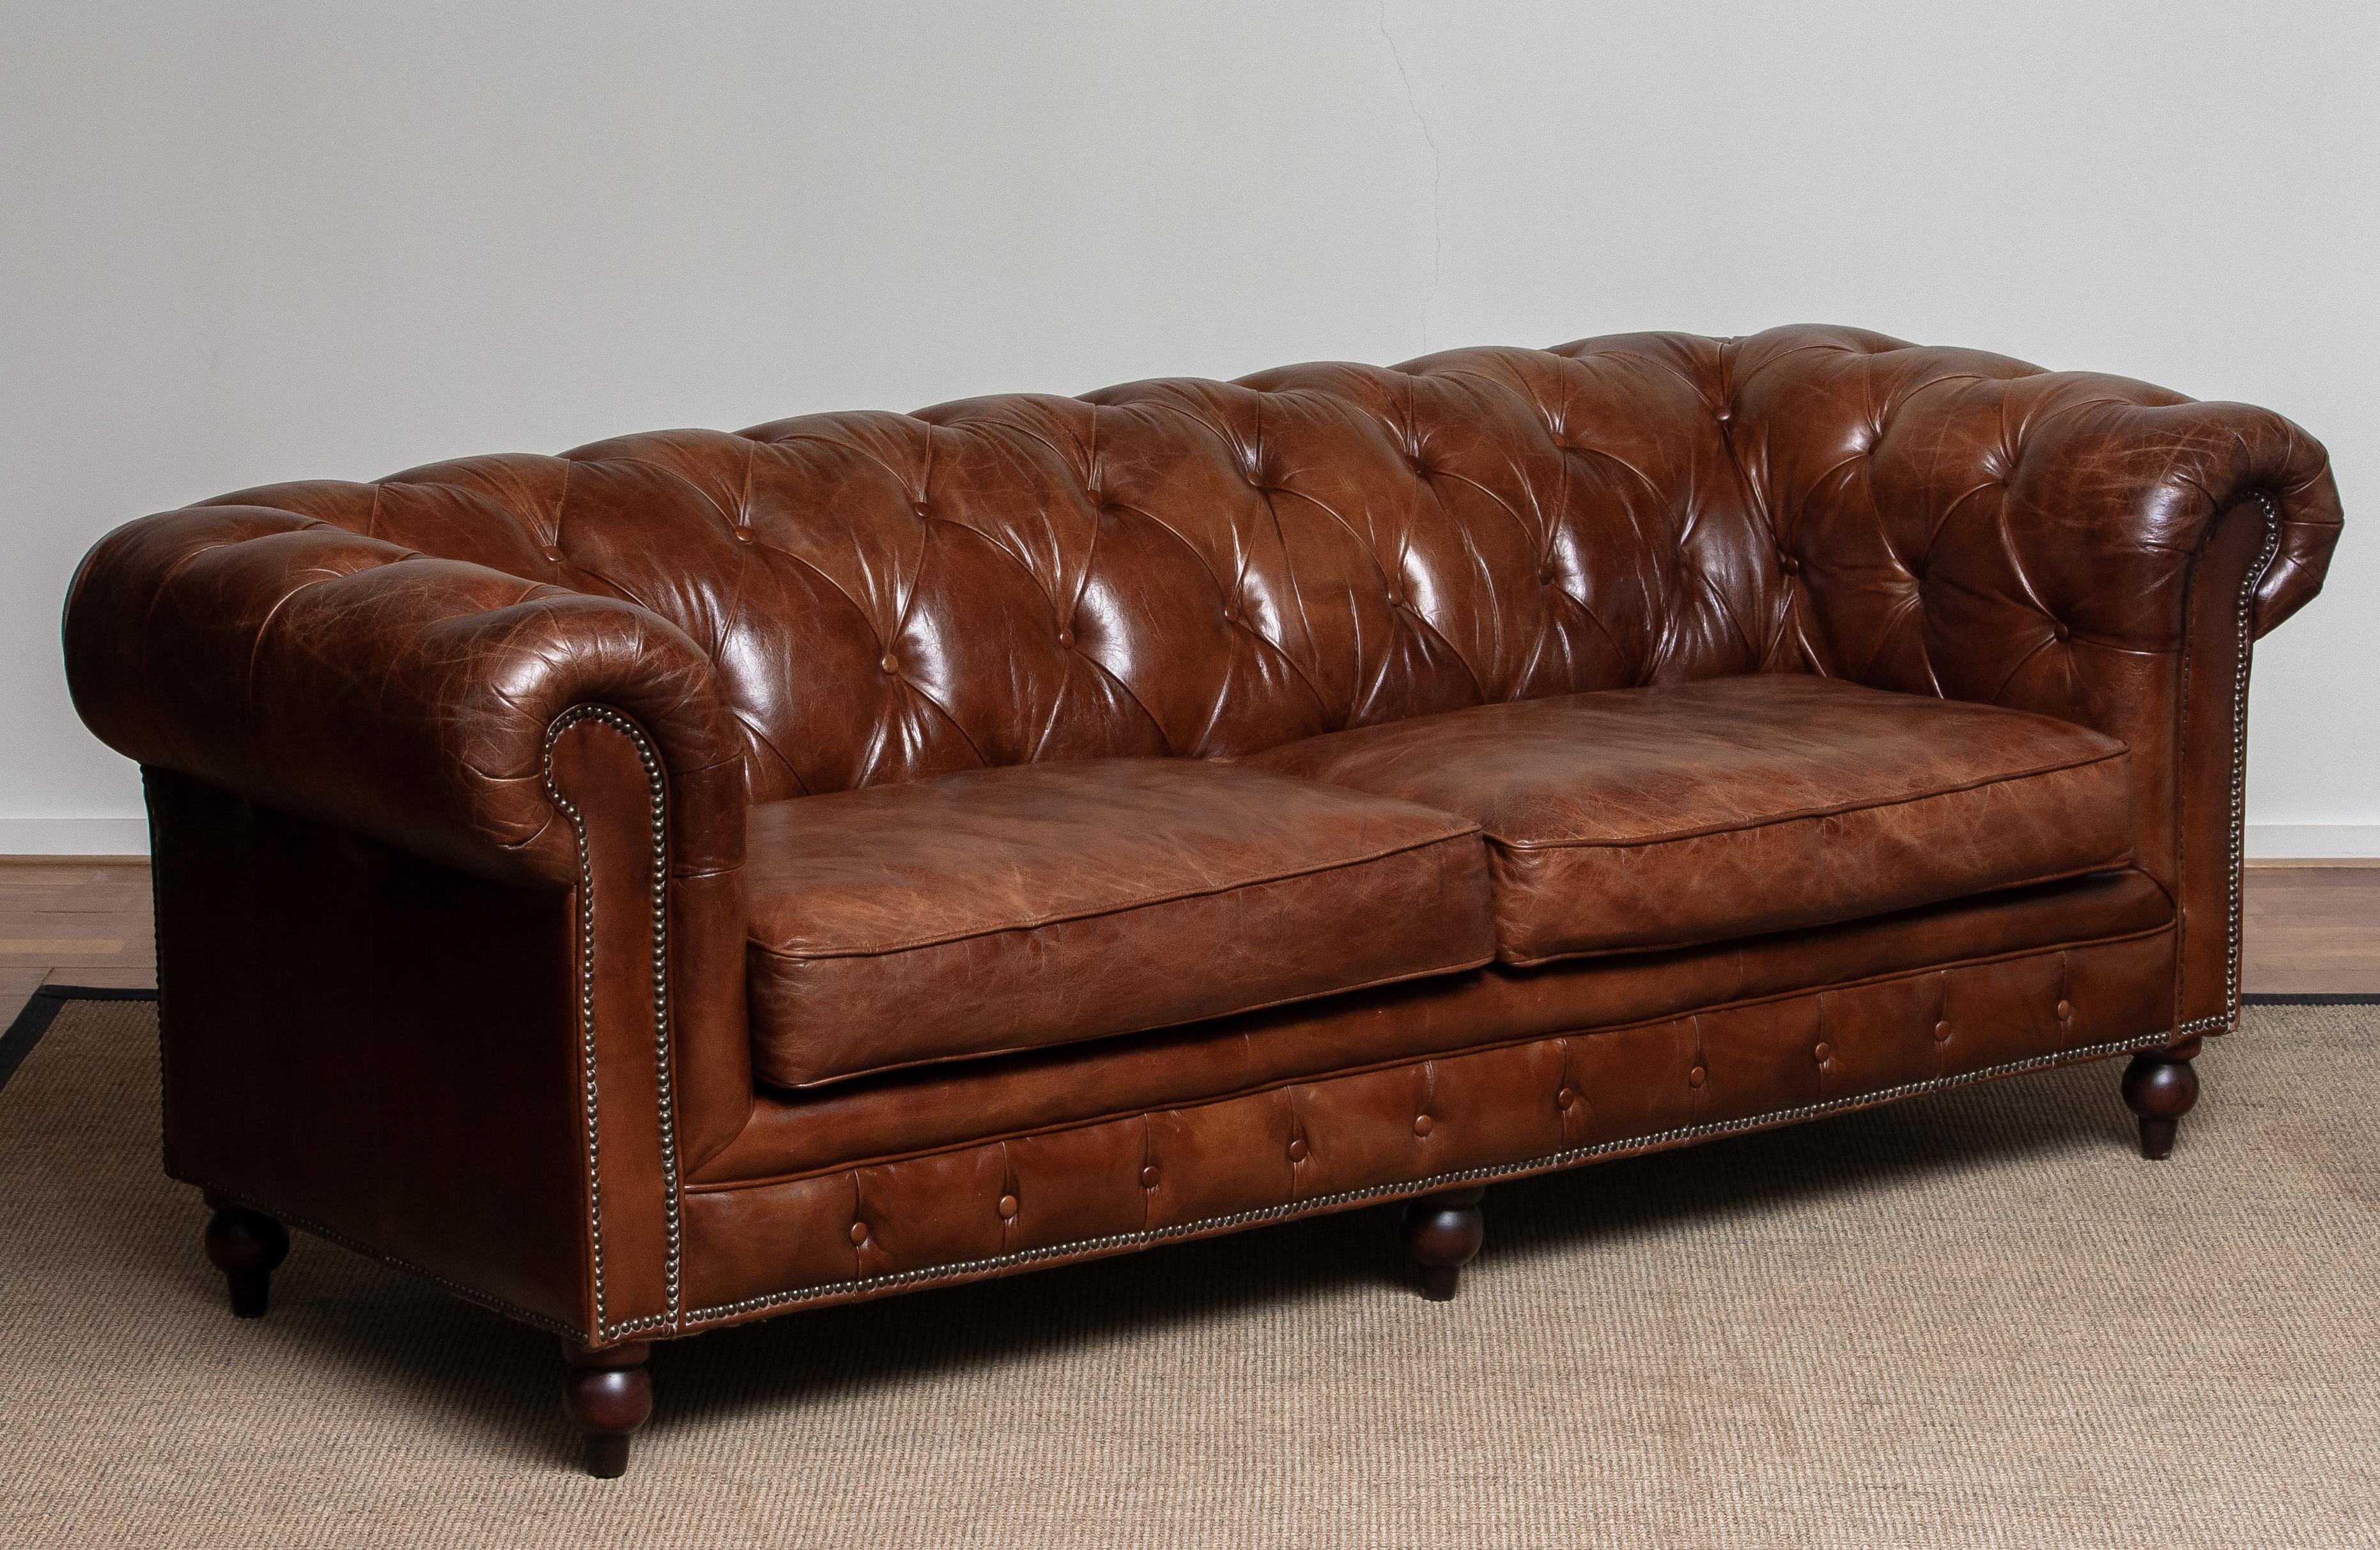 Tufted Brown Leather English Chesterfield Sofa from the 20th Century In Good Condition In Silvolde, Gelderland